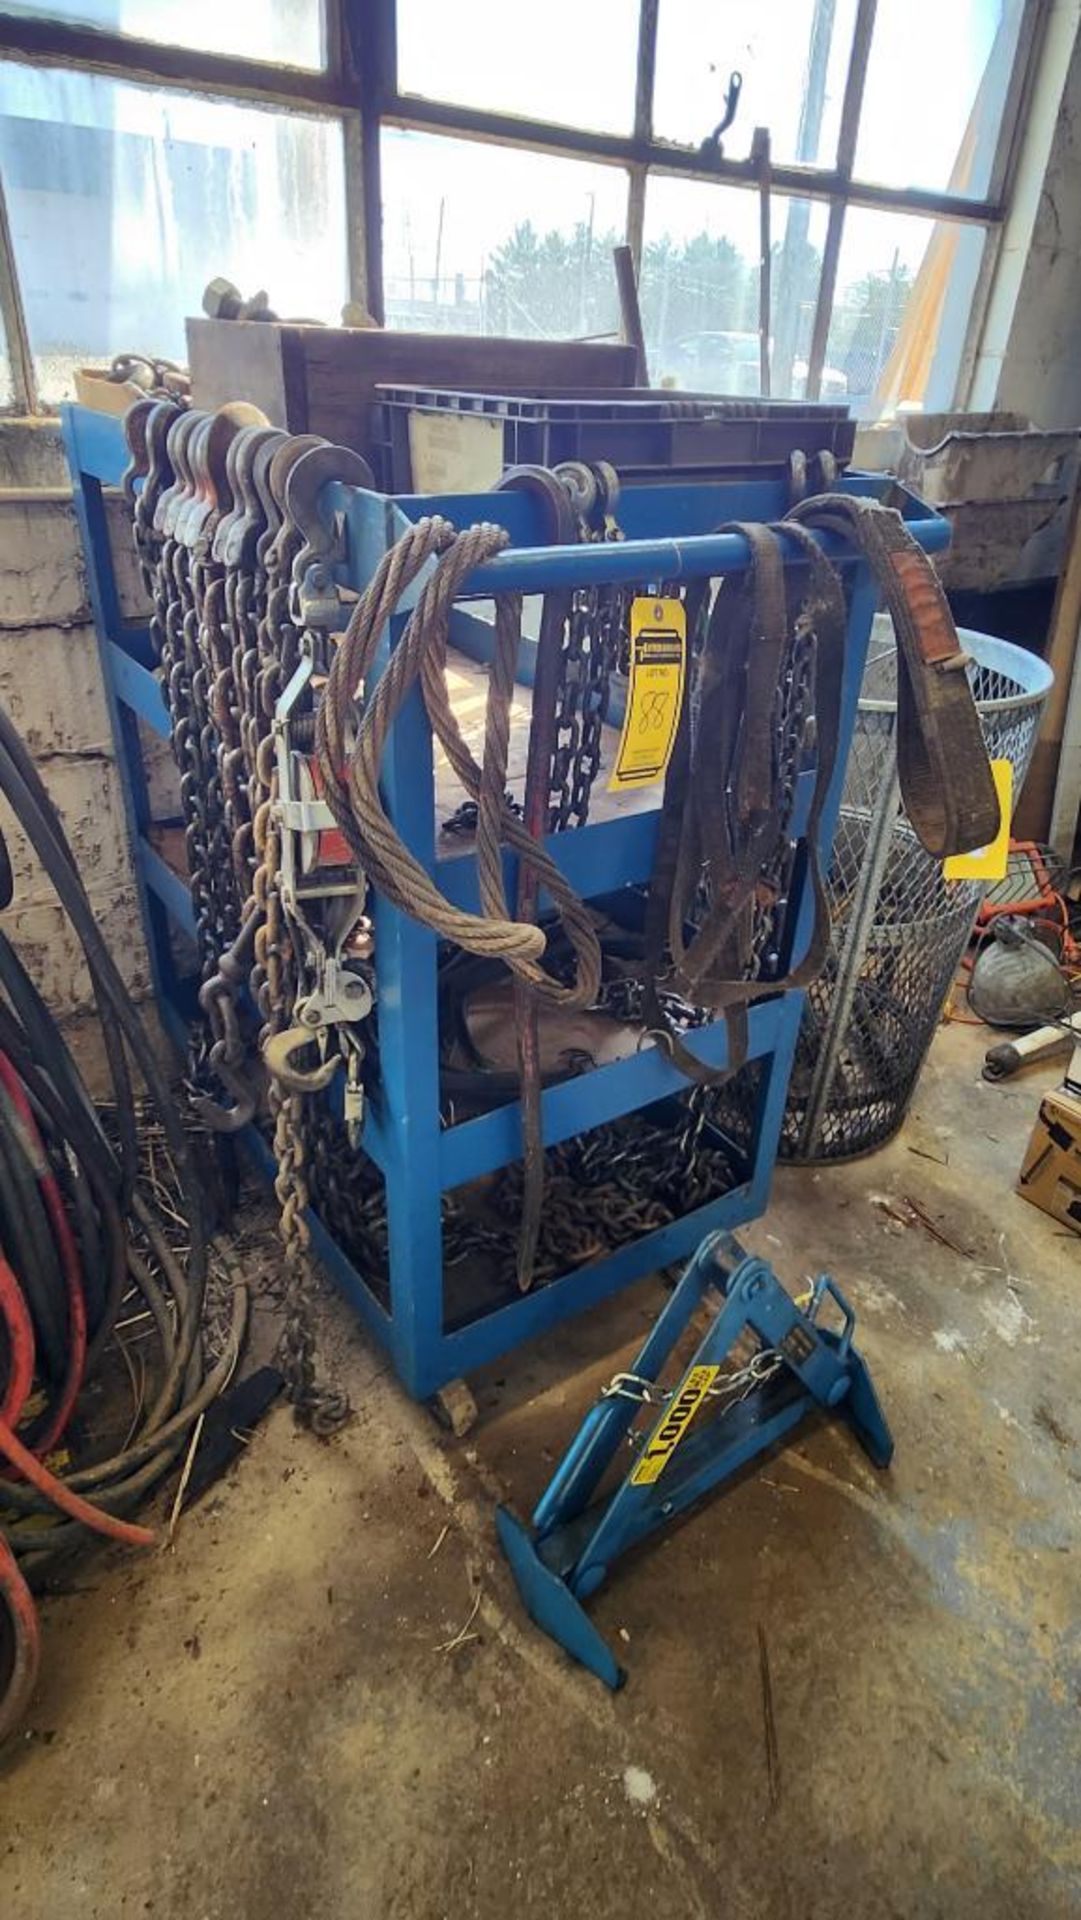 Steel Shop Cart w/ Content of Rigging Chains, Hooks, Eyebolts, Shackles, Rigging Harnesses - Image 2 of 5